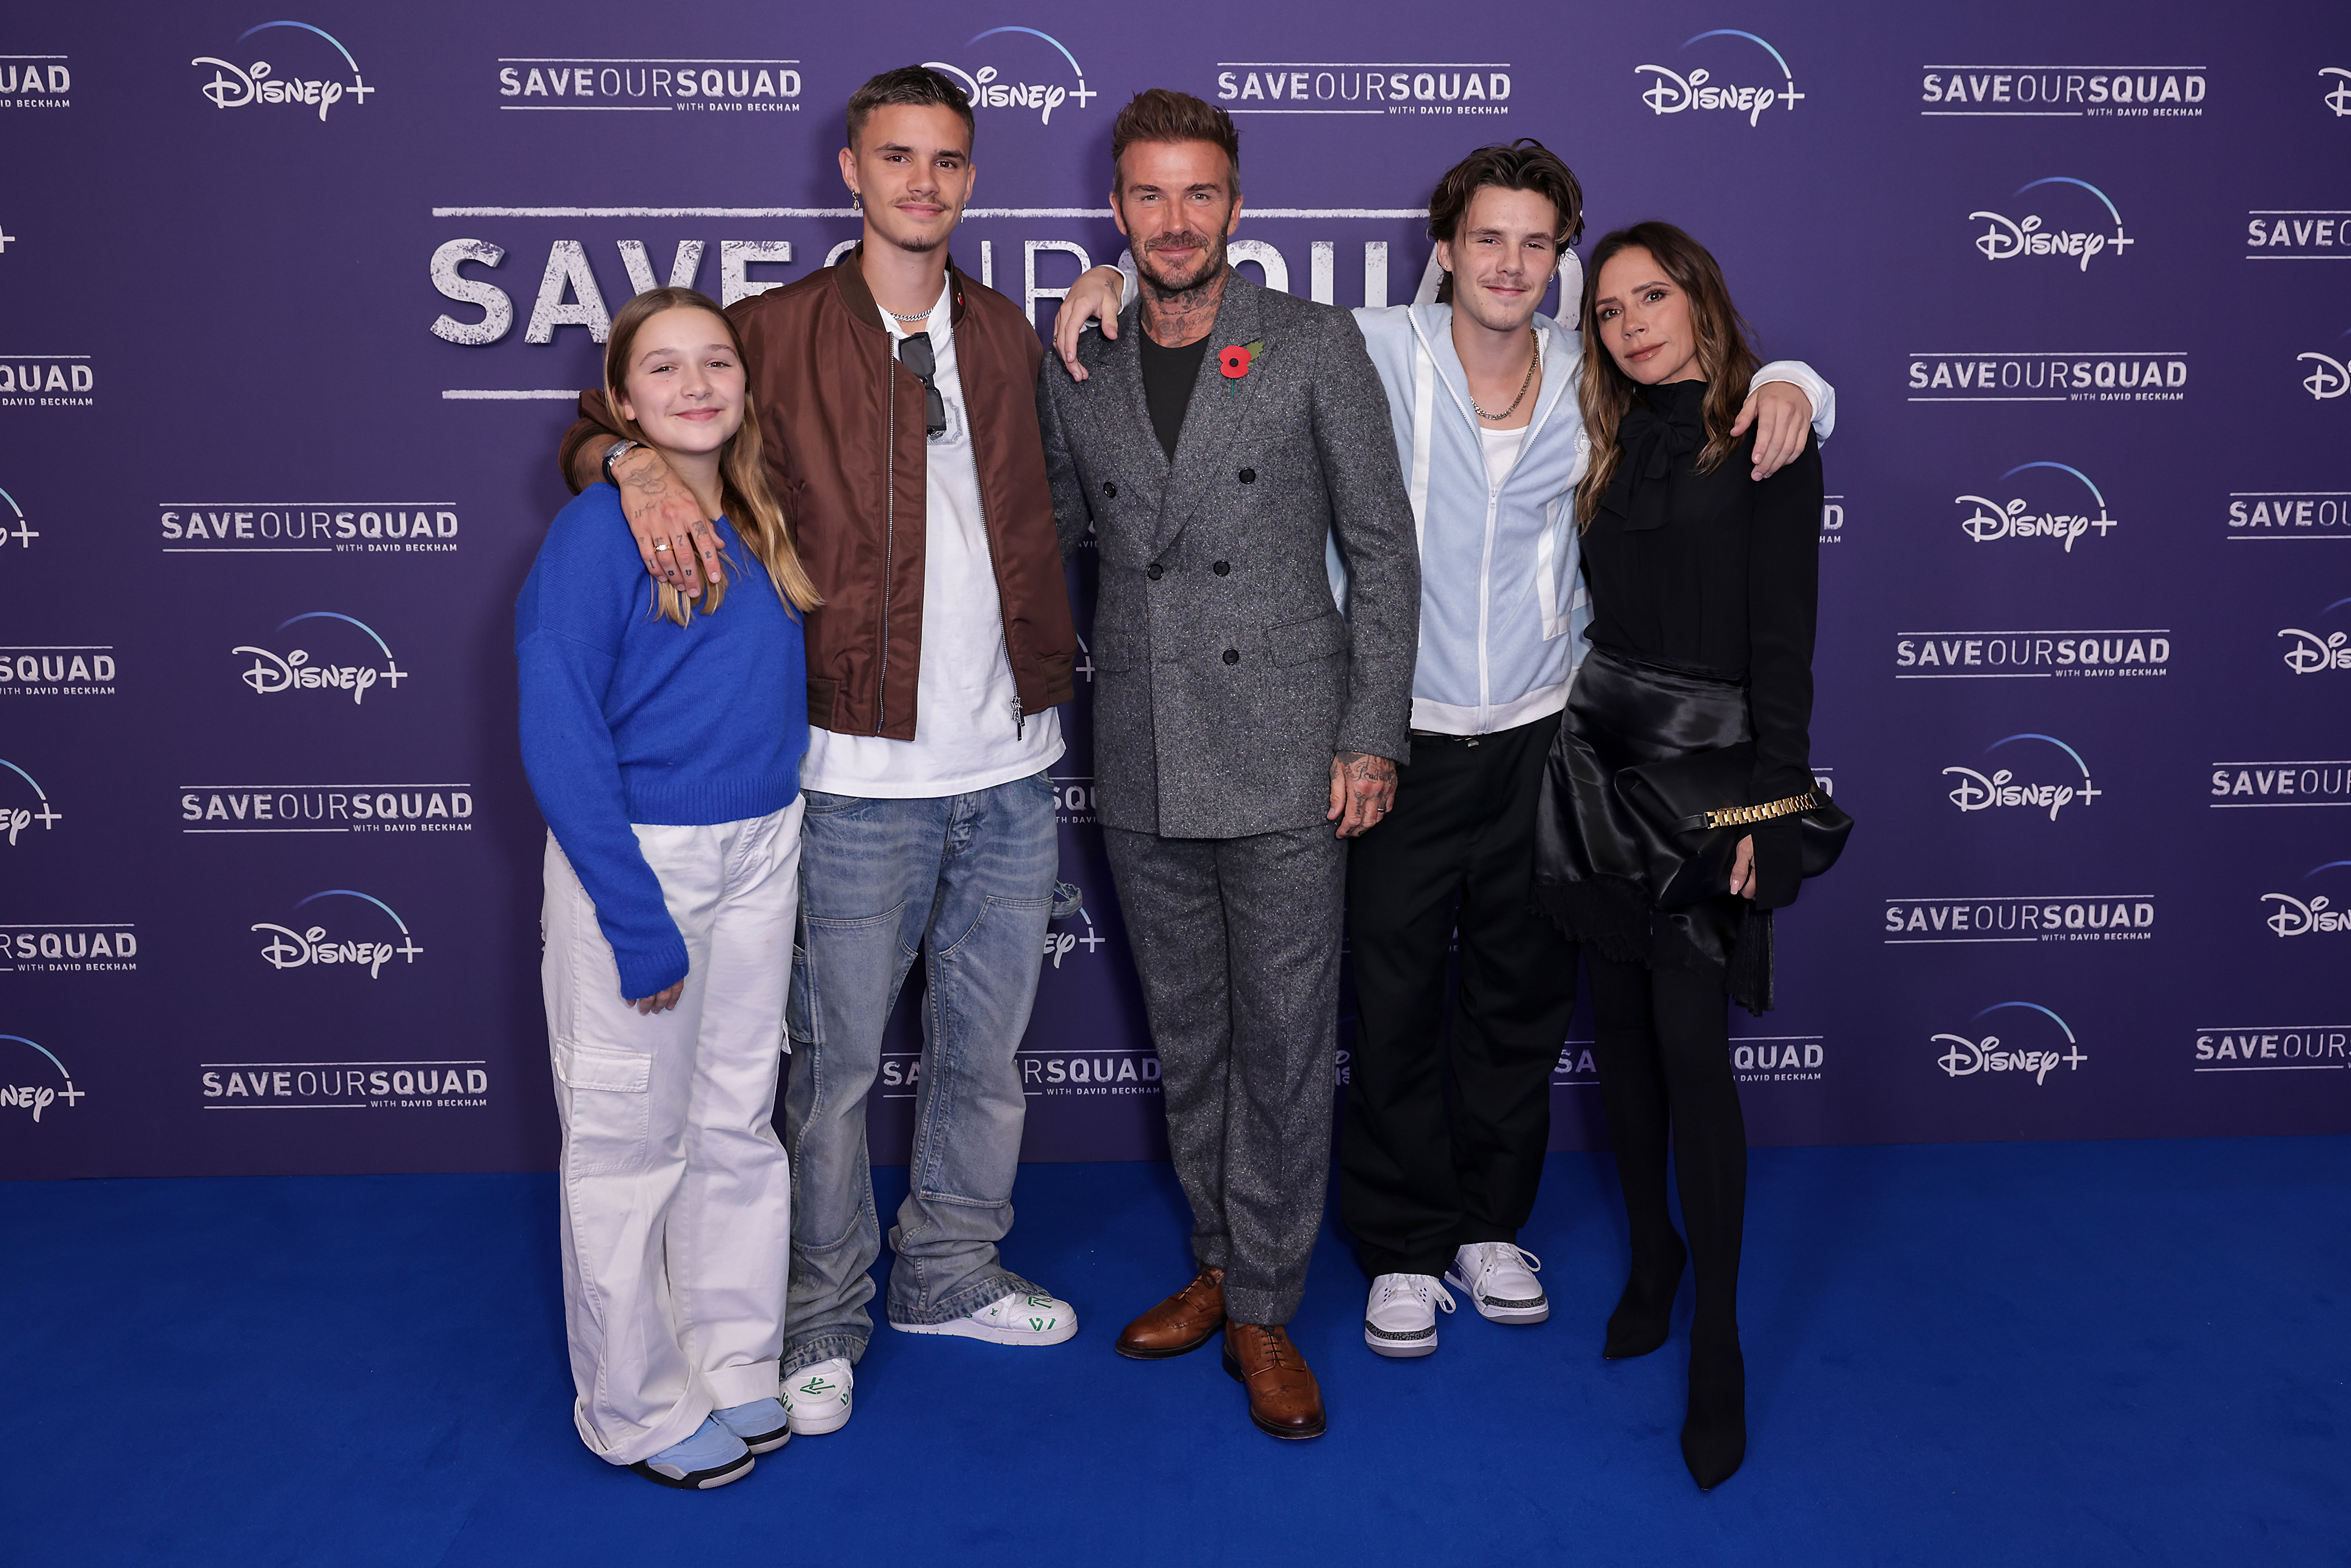 (L to R) Harper Beckham, Romeo Beckham, David Beckham, Cruz Beckham and Victoria Beckham attend exclusive screening event for the Disney series "Save Our Squad with David Bechkham" at Odeon Luxe West End on November 1, 2022 in London, England | Source: Getty Images